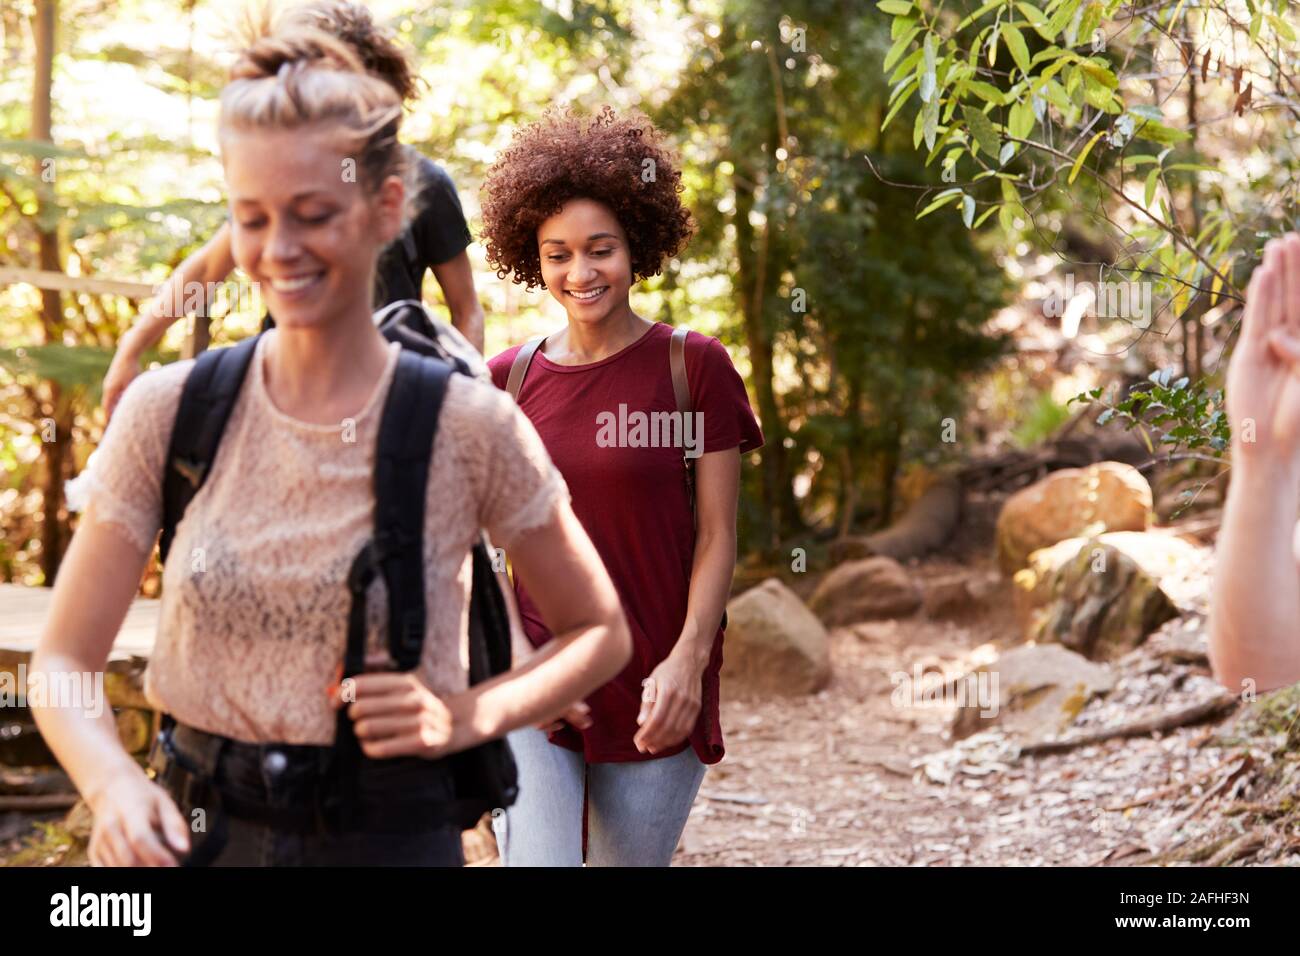 Millennial girlfriends walking together during a hike in a forest, close up Stock Photo